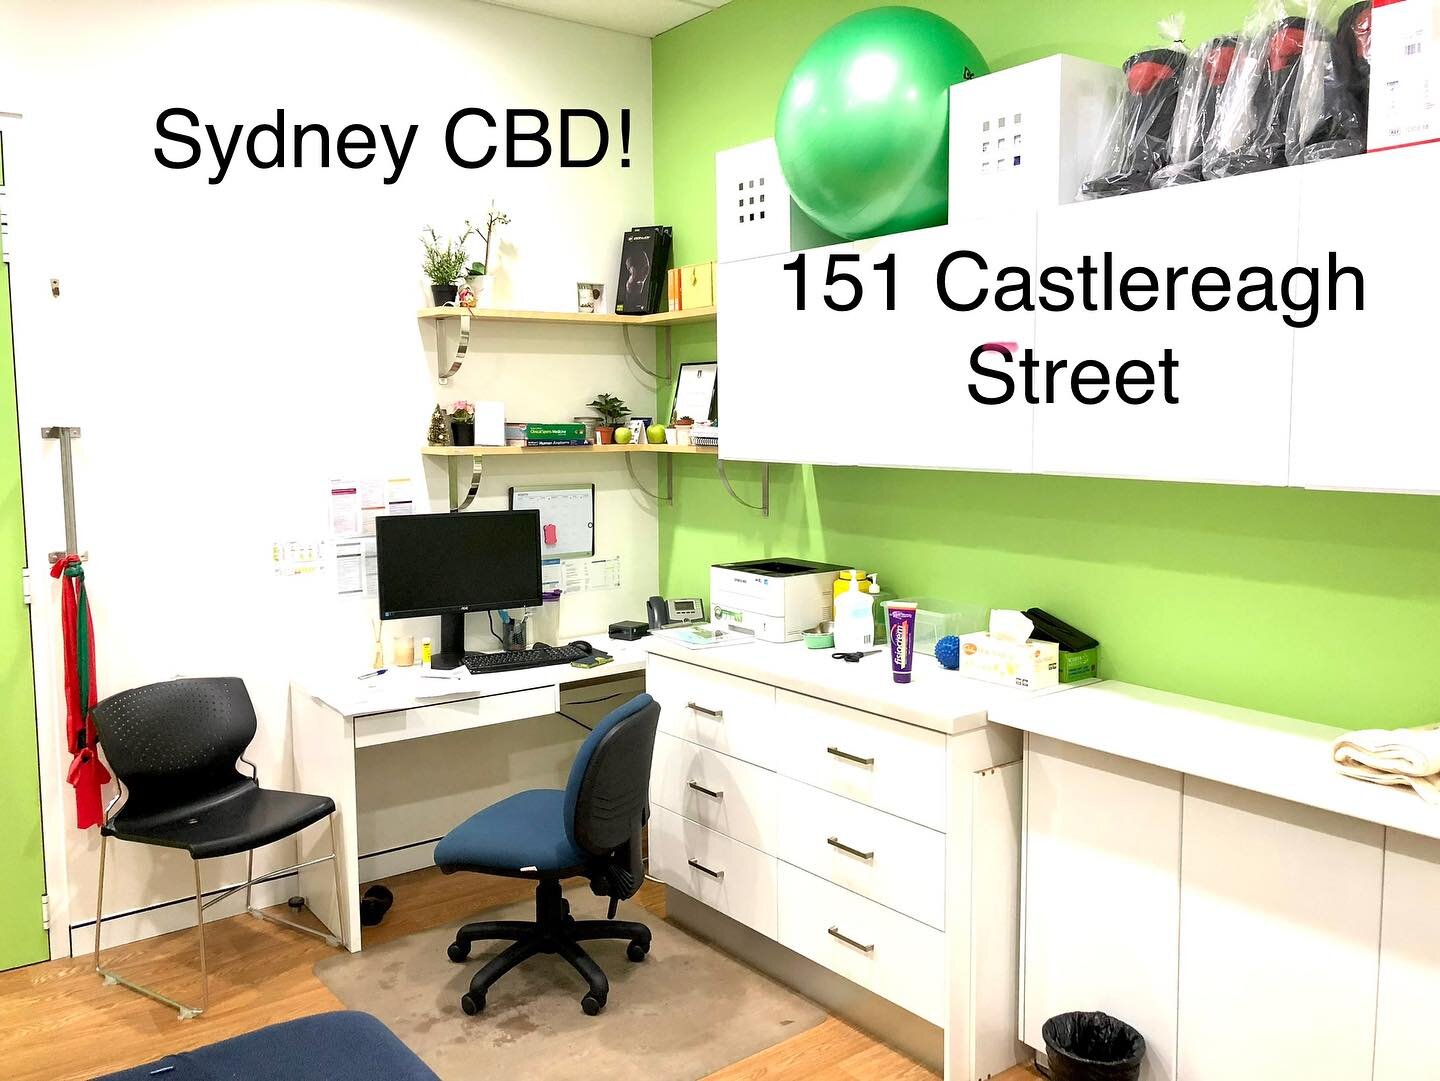 Our Sydney CBD clinic is now operating Tuesdays - Fridays 8:30 am to 5:30 pm. Giving you the access to premium Physiotherapy and massage services. Now there are more reasons to return to the office. Get treated!  #bupamembersfirst #nibfirstchoiceprov